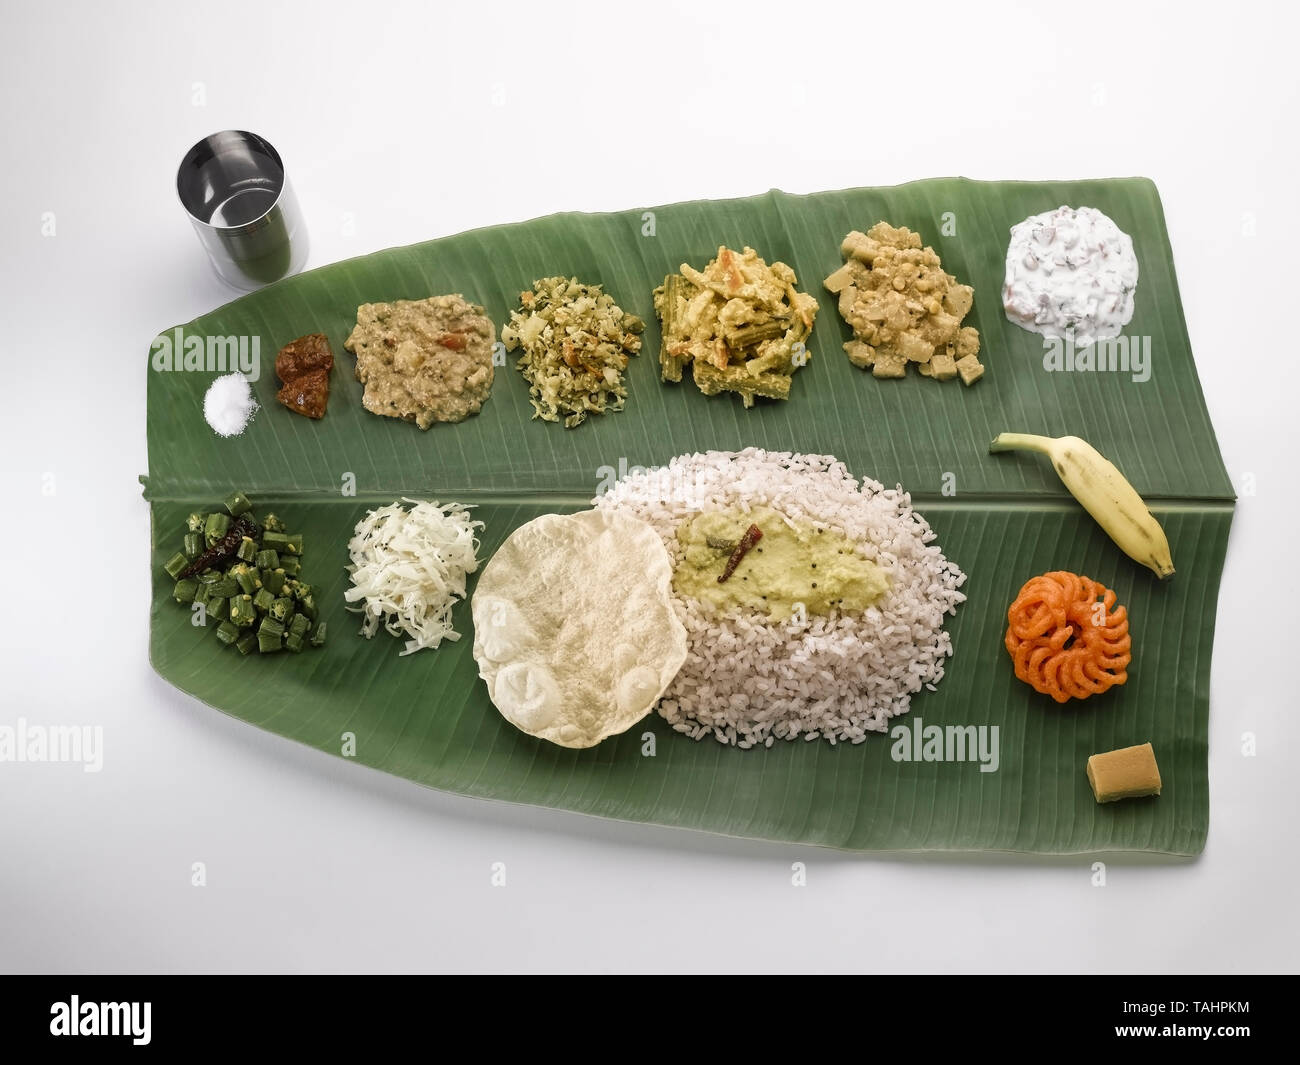 A STILL LIFE OF A TRADITIONAL TAMIL, SOUTH INDIAN ,  LUNCH SERVED ON A GREEN PLANTAIN LEAF. FROM TOP LEFT GOING RIGHT ARE-SALT; MANGO PICKLE; COCUNUT  Stock Photo